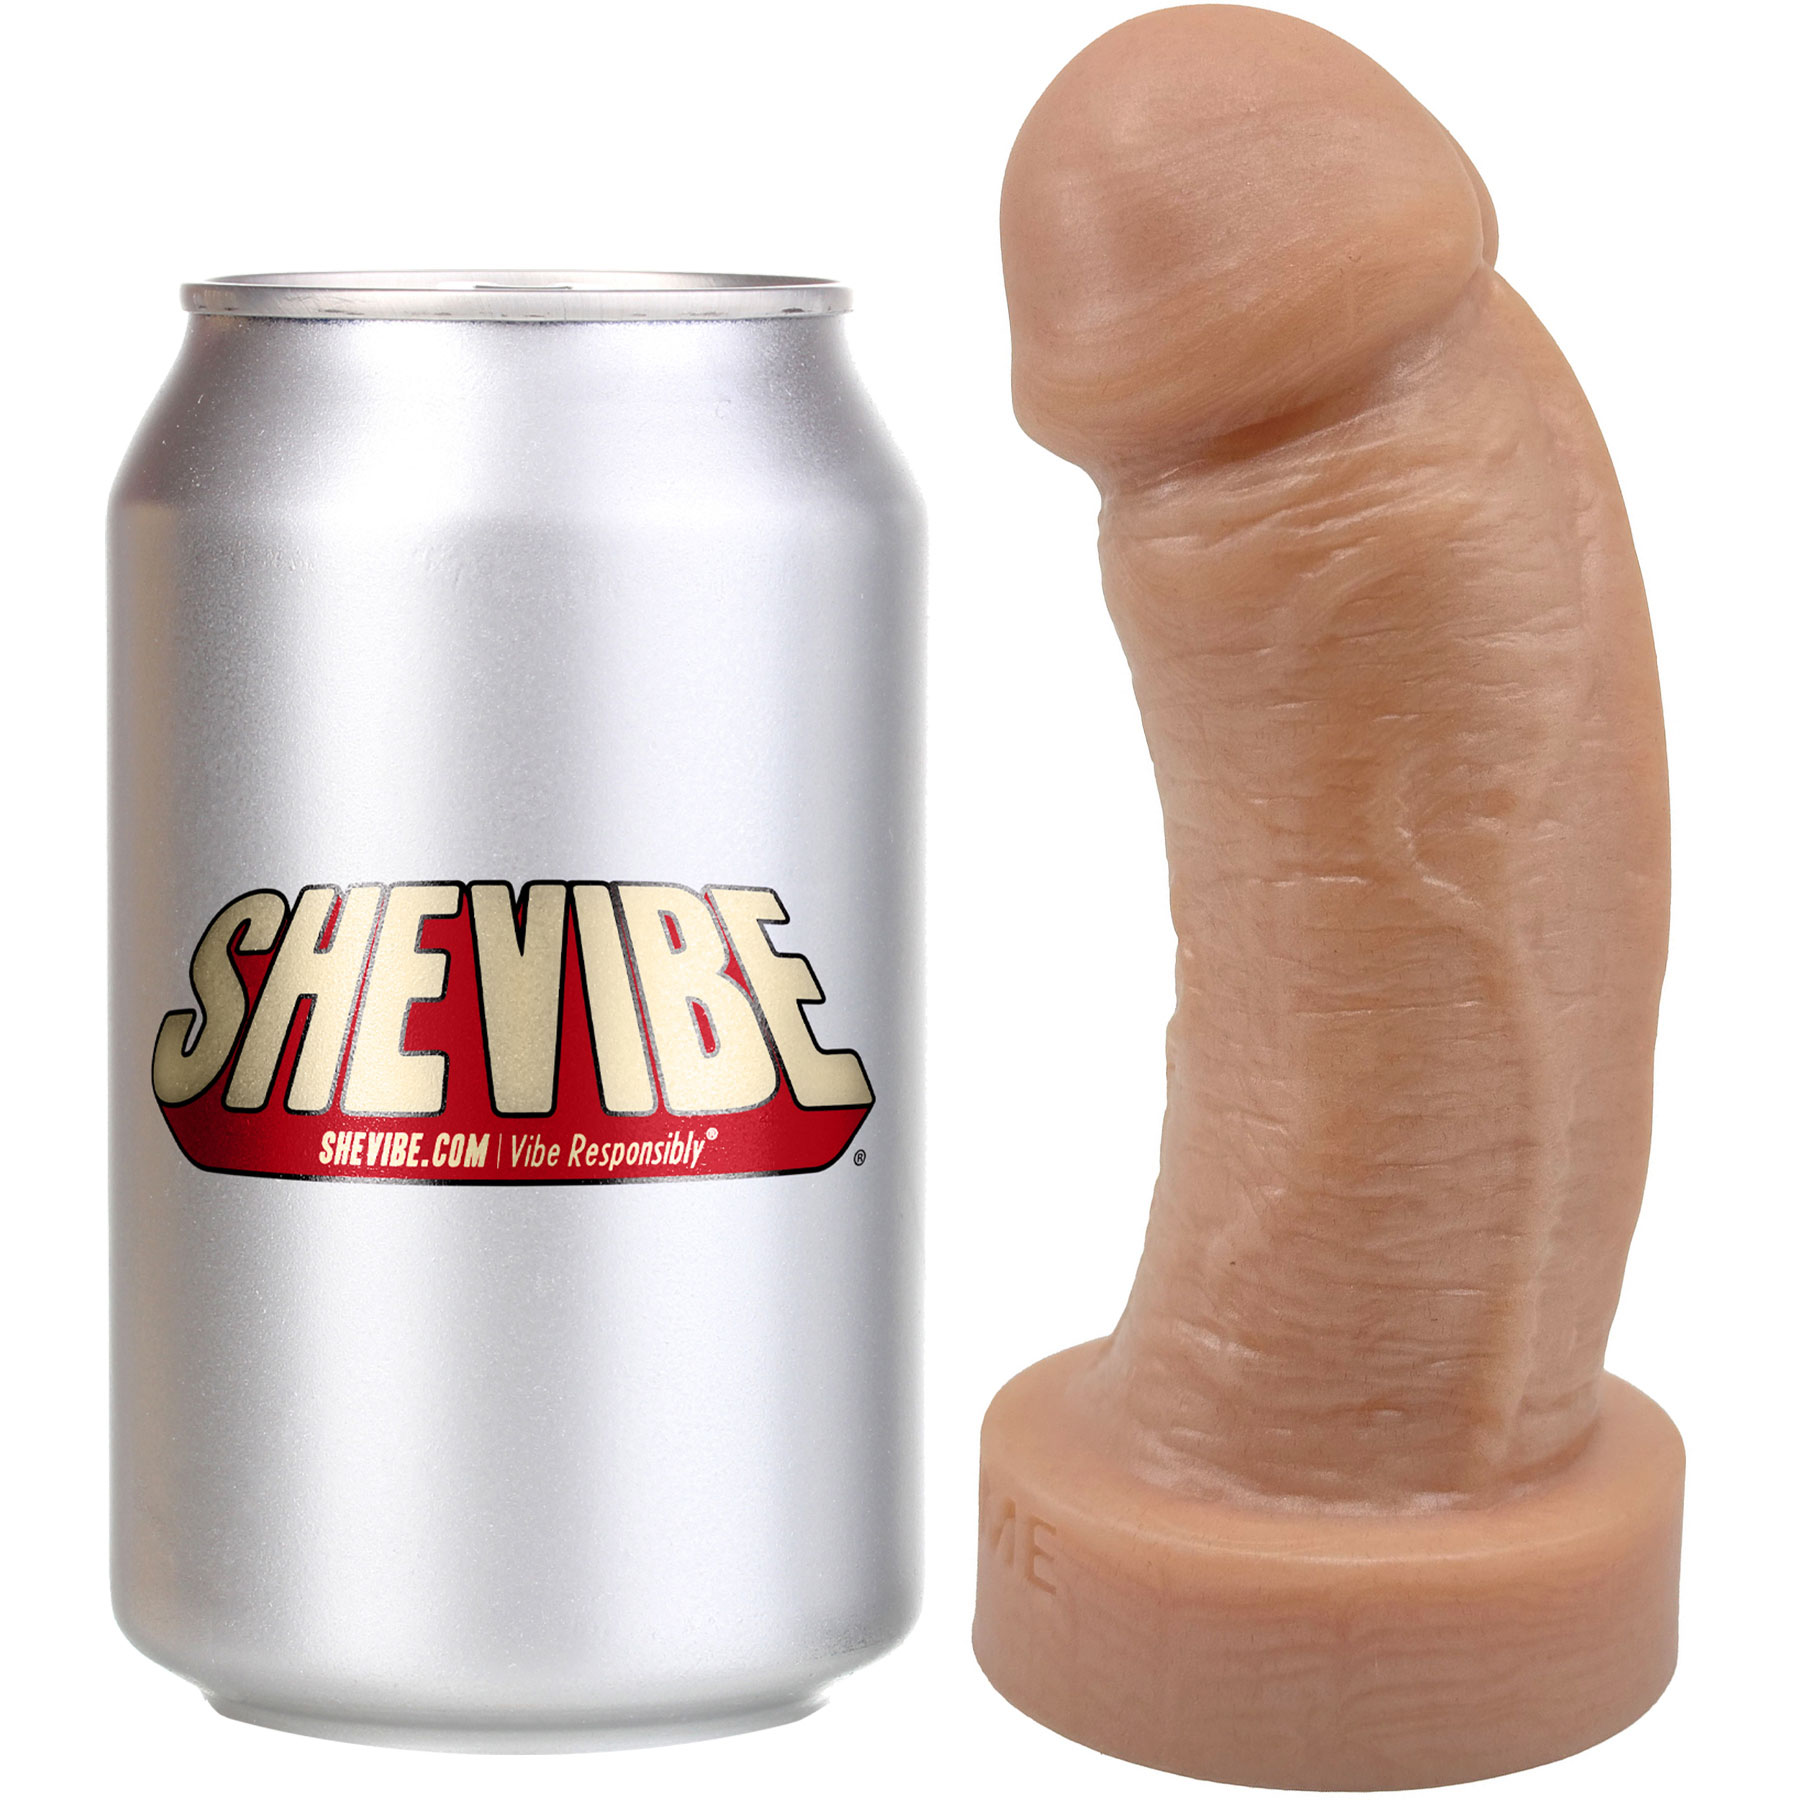 The Basio Short & Thick 5.75" Platinum Silicone Realistic Dildo By Uberrime - With Soda Can